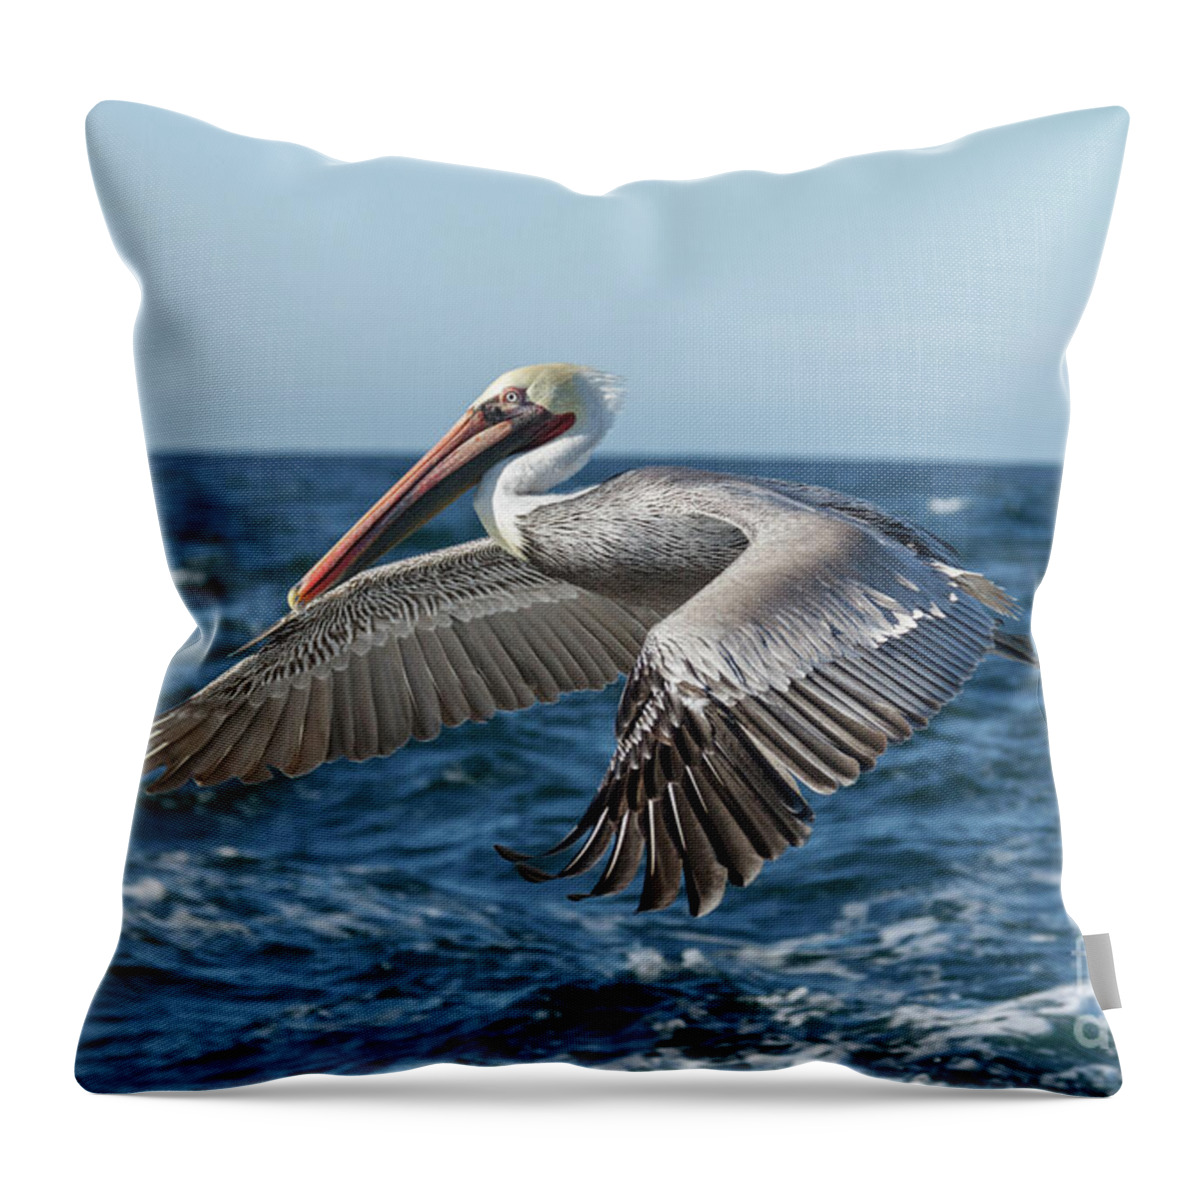 Pelican Throw Pillow featuring the photograph Flying Brown Pelican by Robert Bales